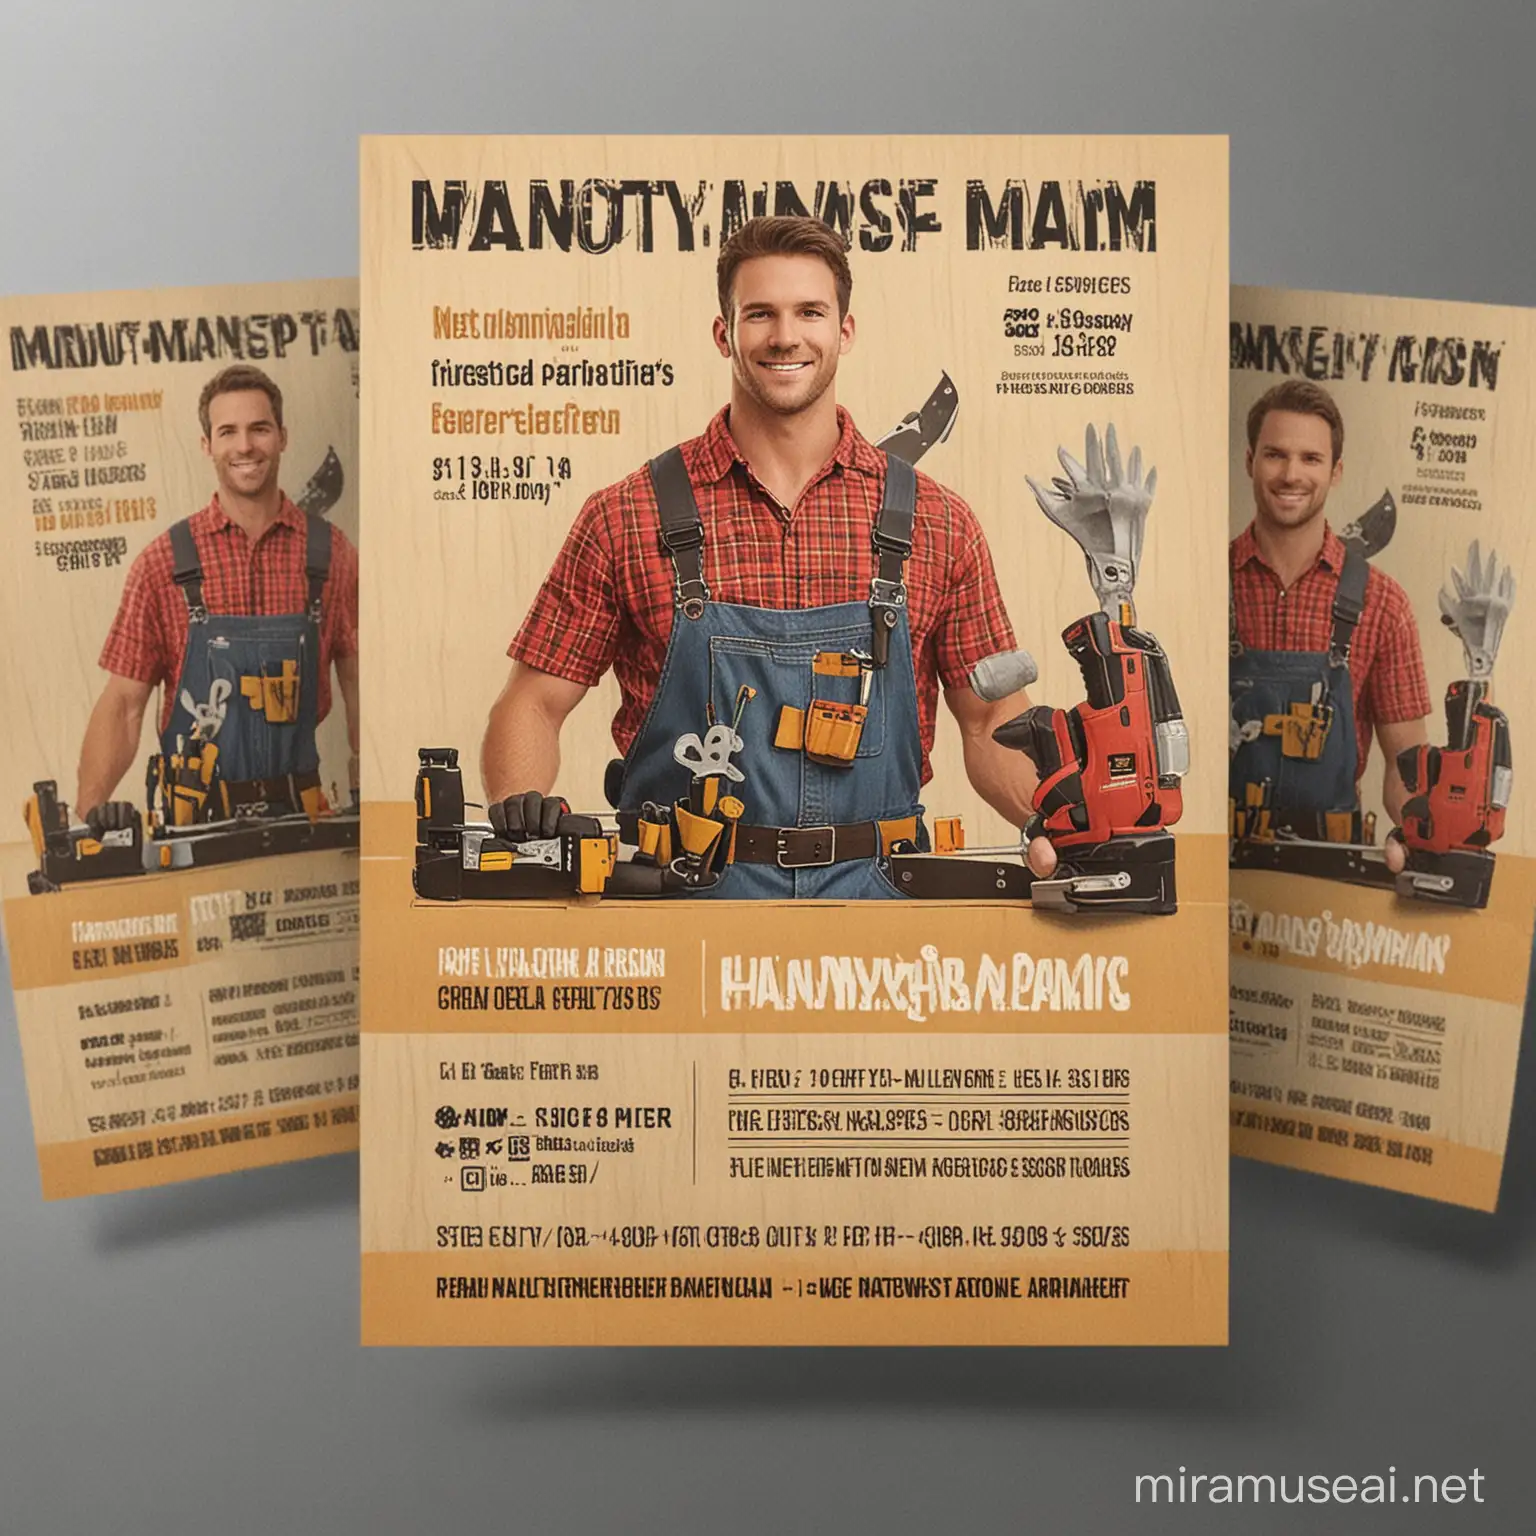 Professional Handyman Services Flyer Expert Repairs and Home Improvements